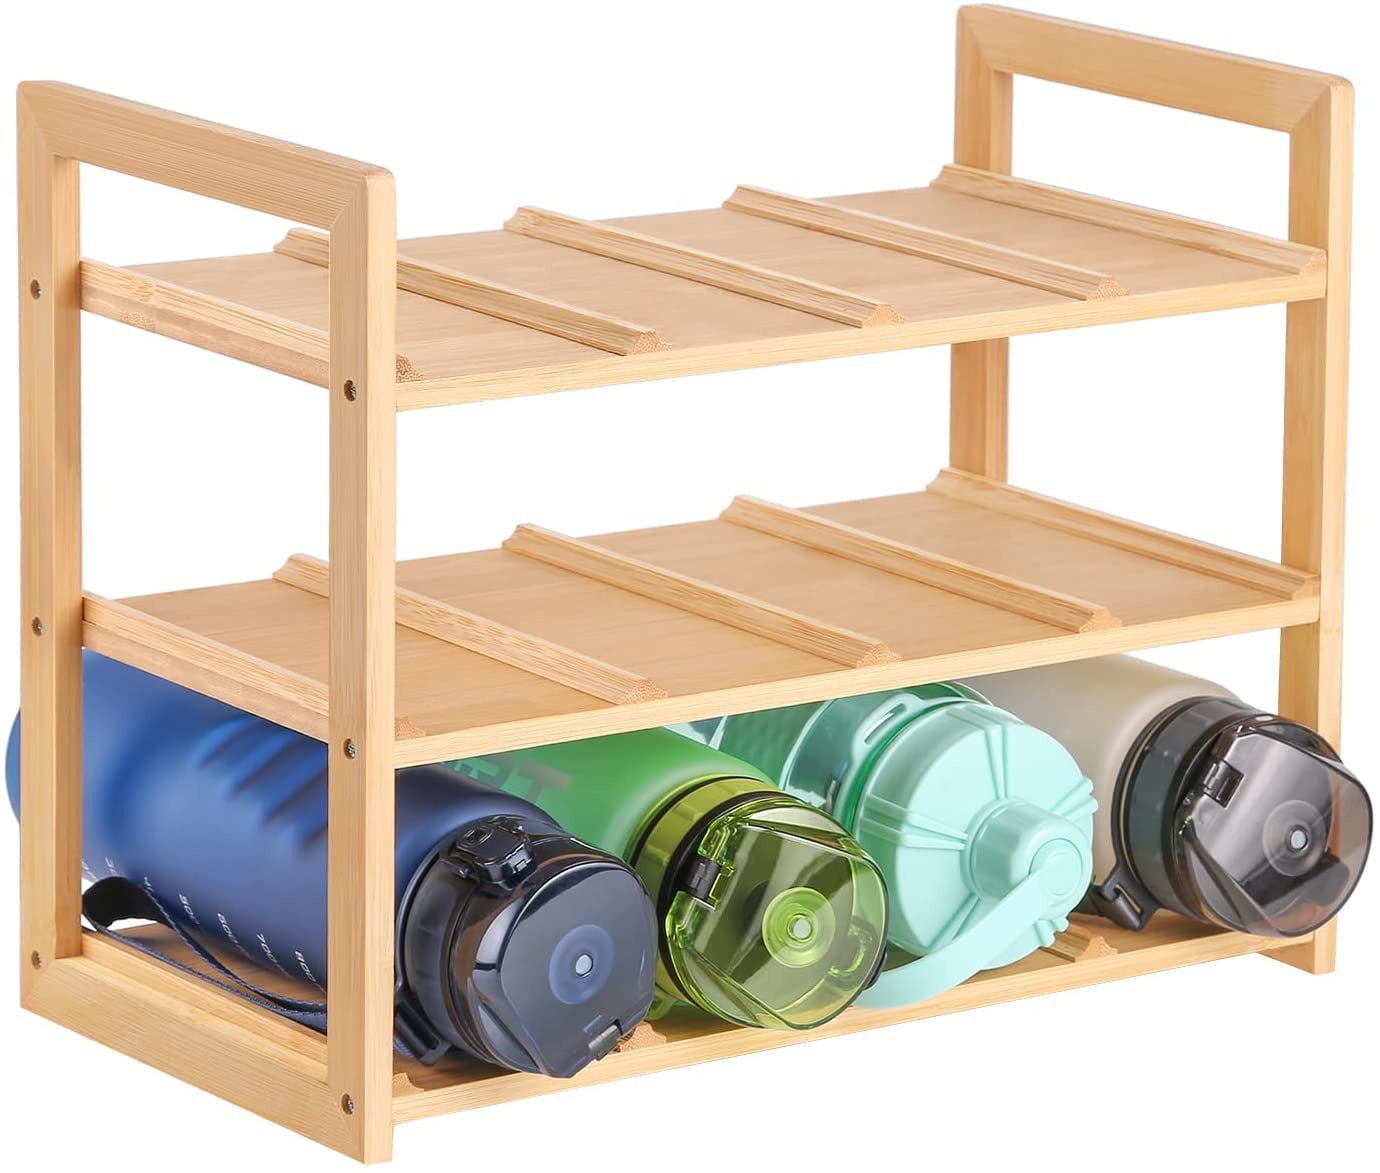 Honey-Can-Do Natural 3-Tier Bamboo Water Bottle Organizer for Cabinet or Pantry